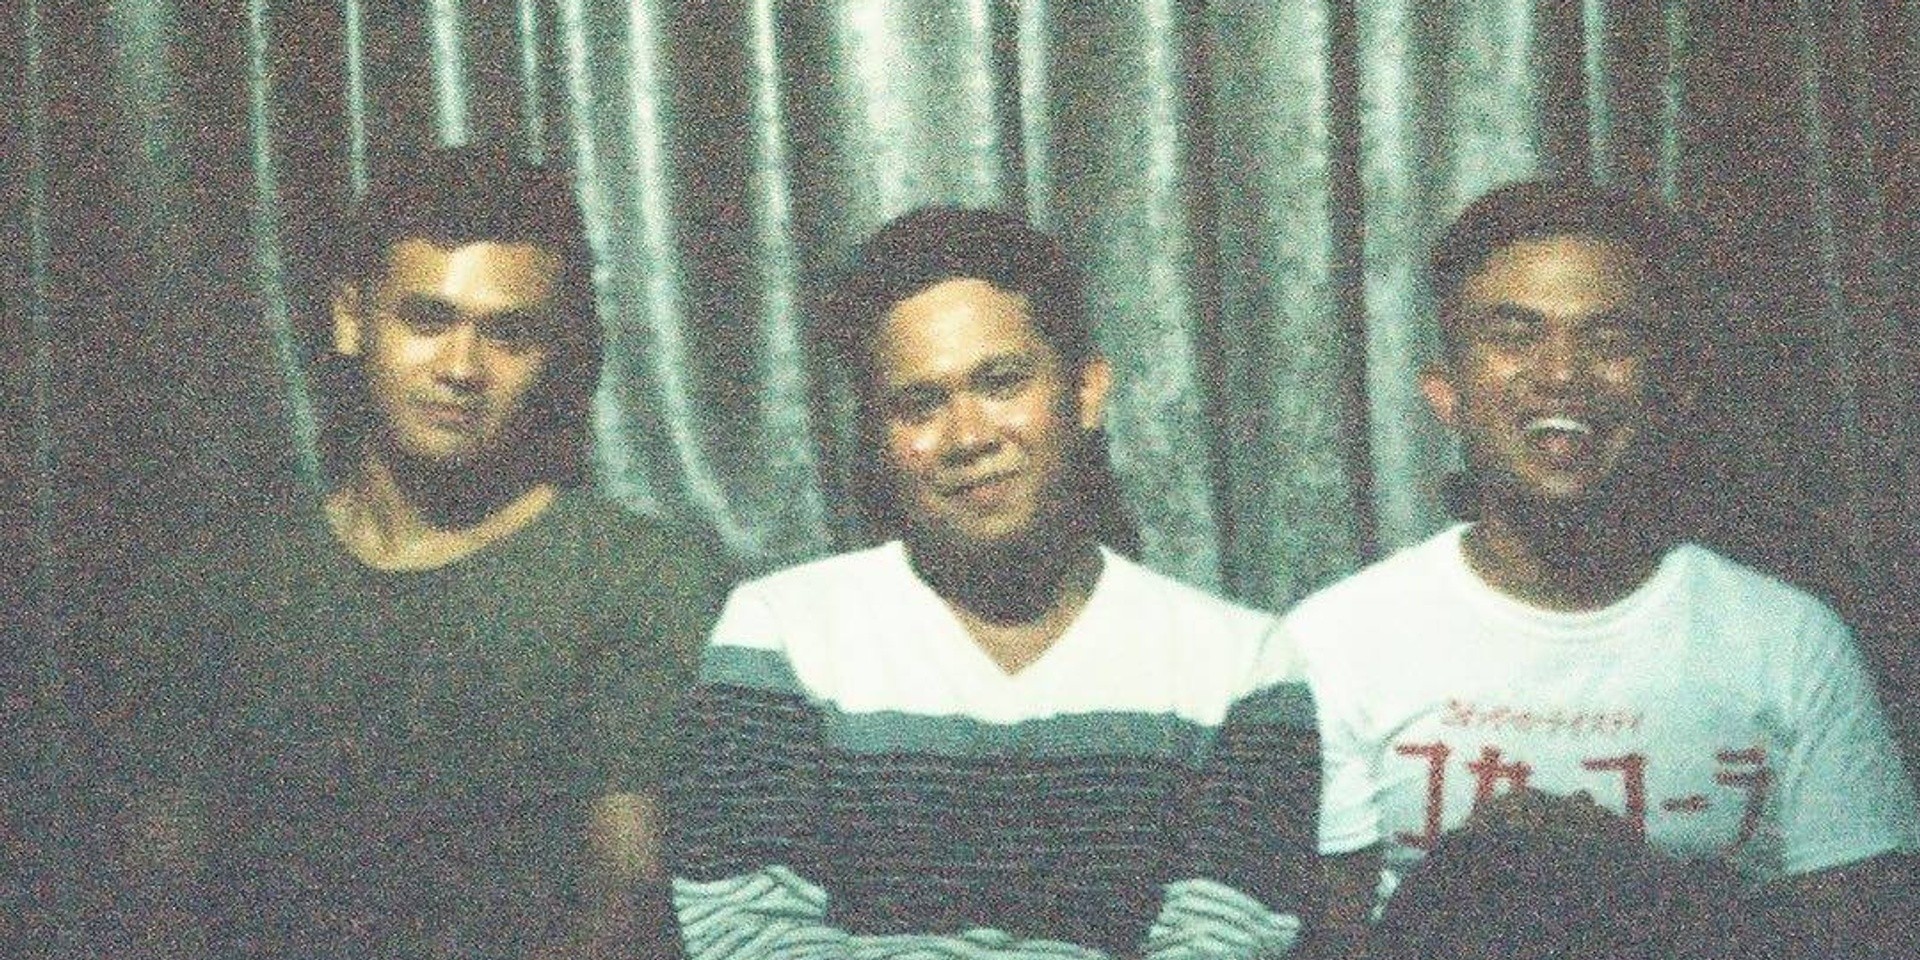 Tapestry's frontman Syed Hafiz passes away, bandmates are organising fundraiser for family 